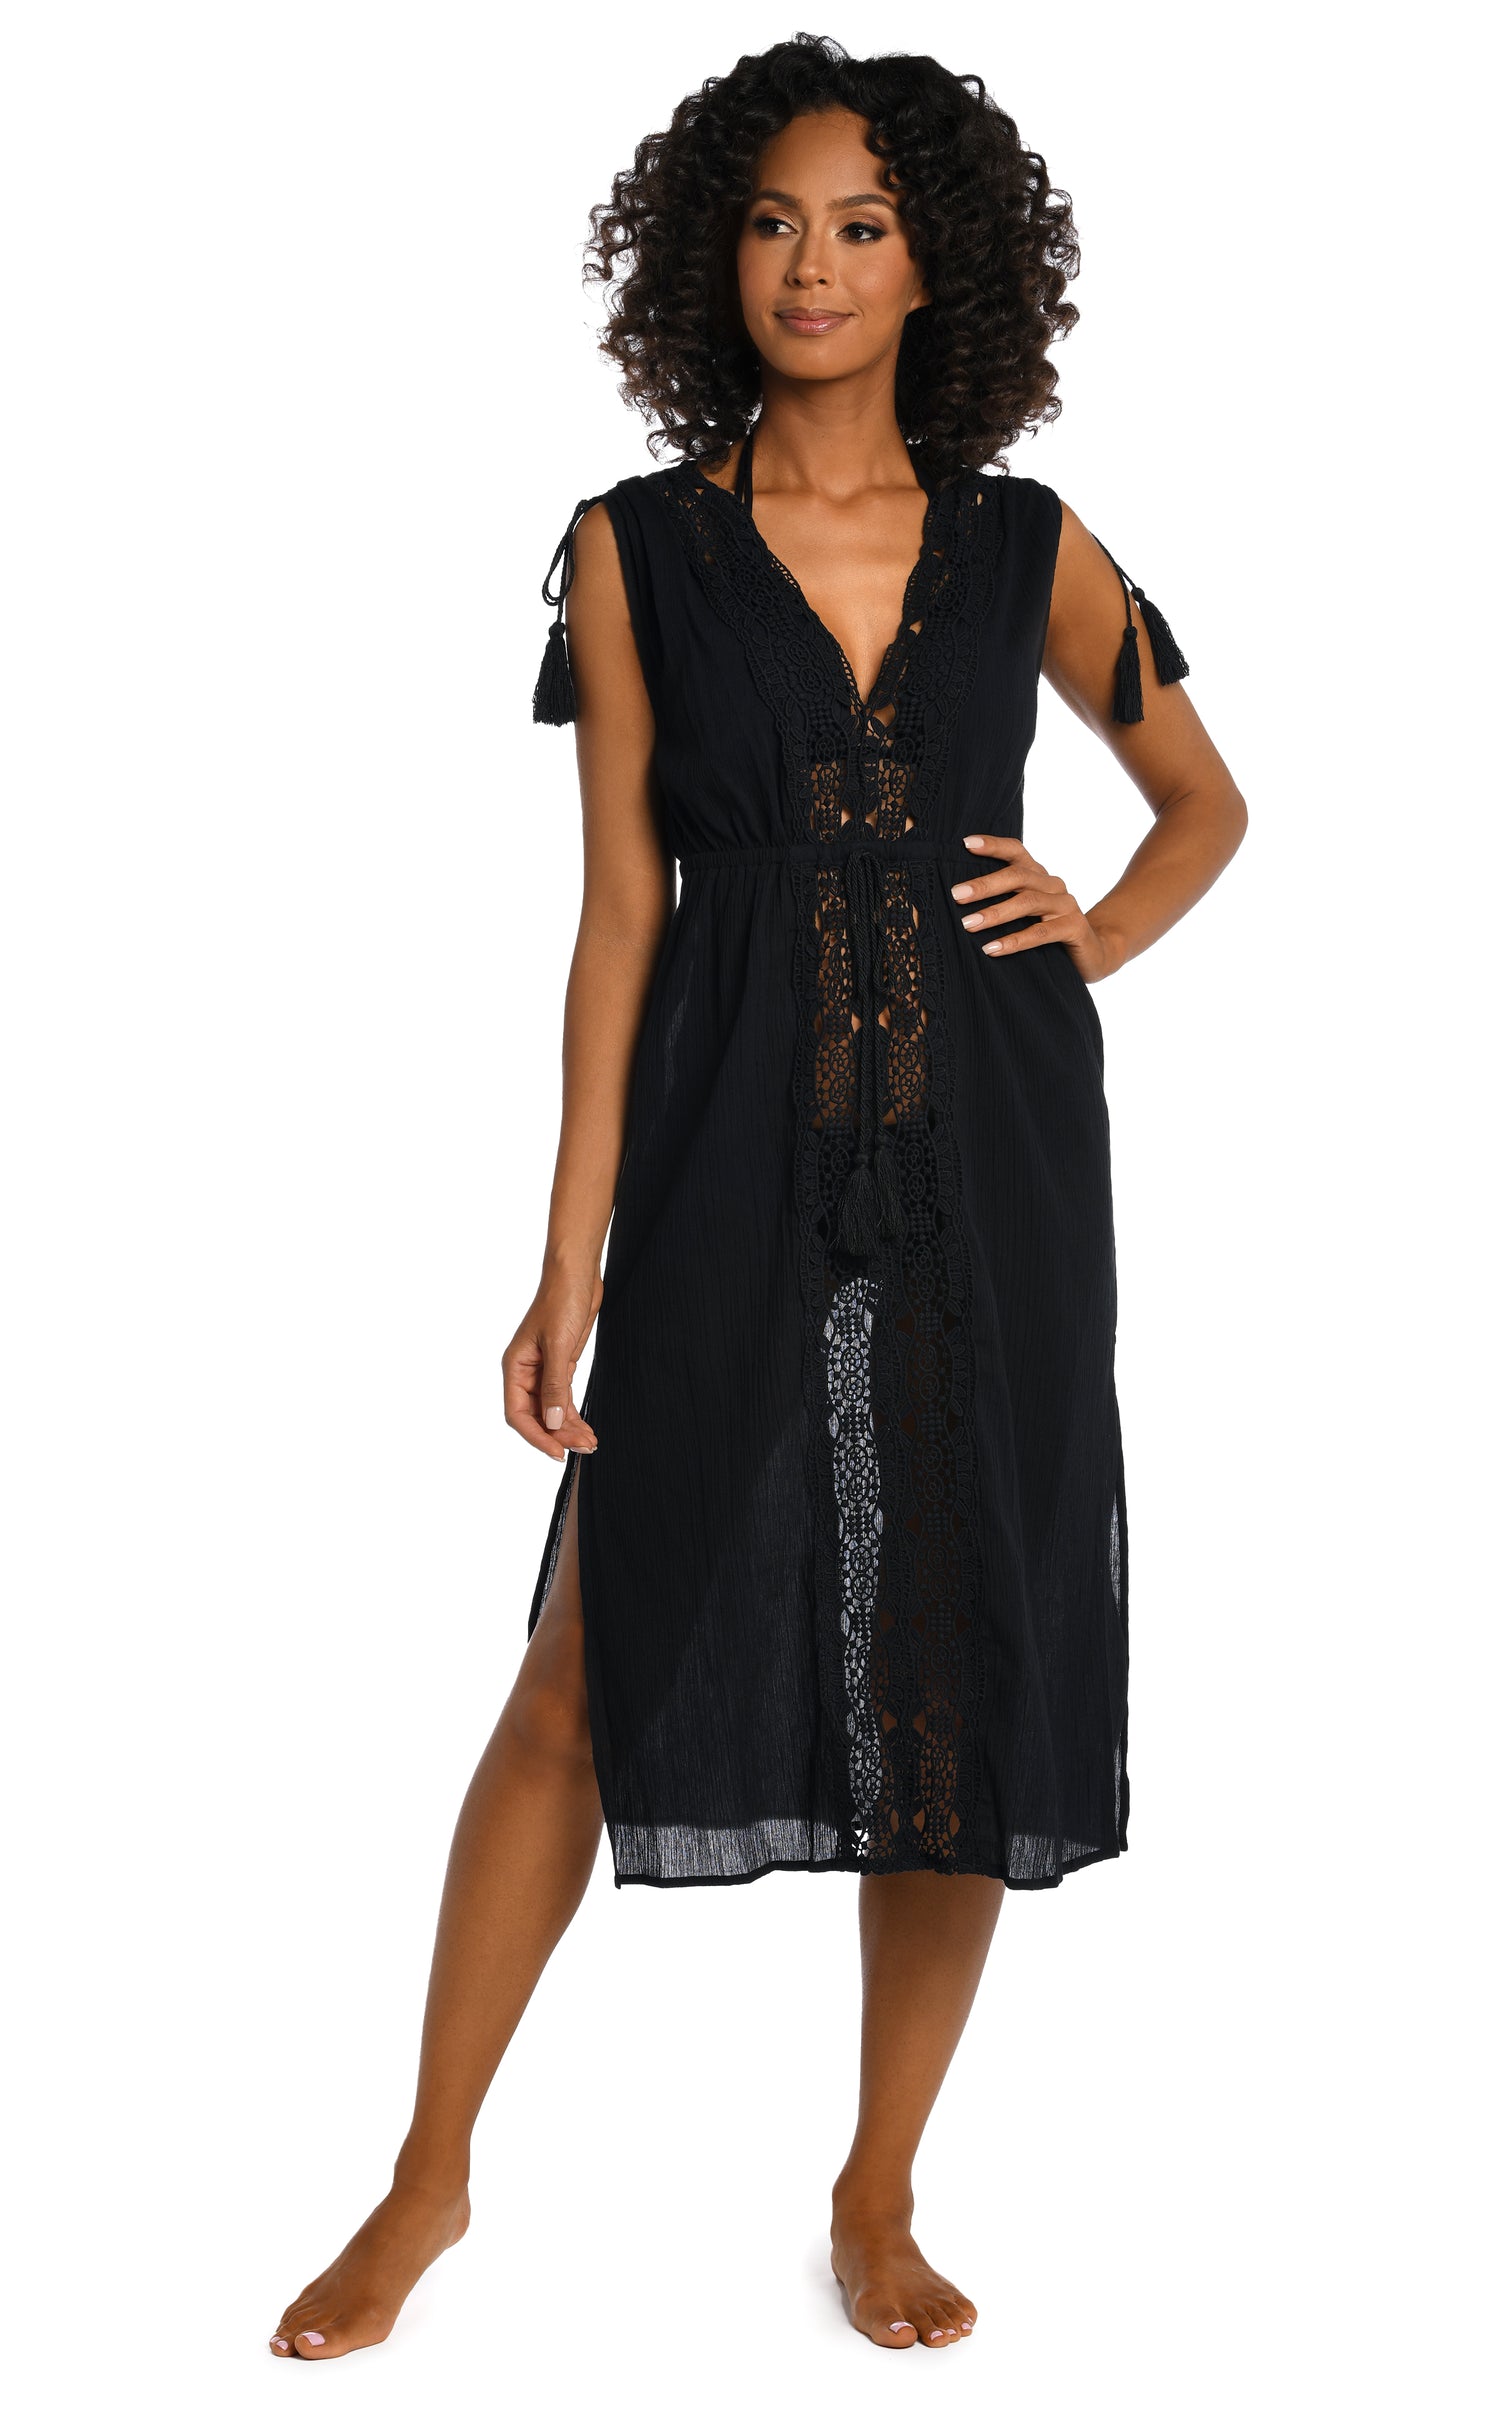 Model is wearing a black mid-length dress swimsuit cover up from our Island Fare collection.